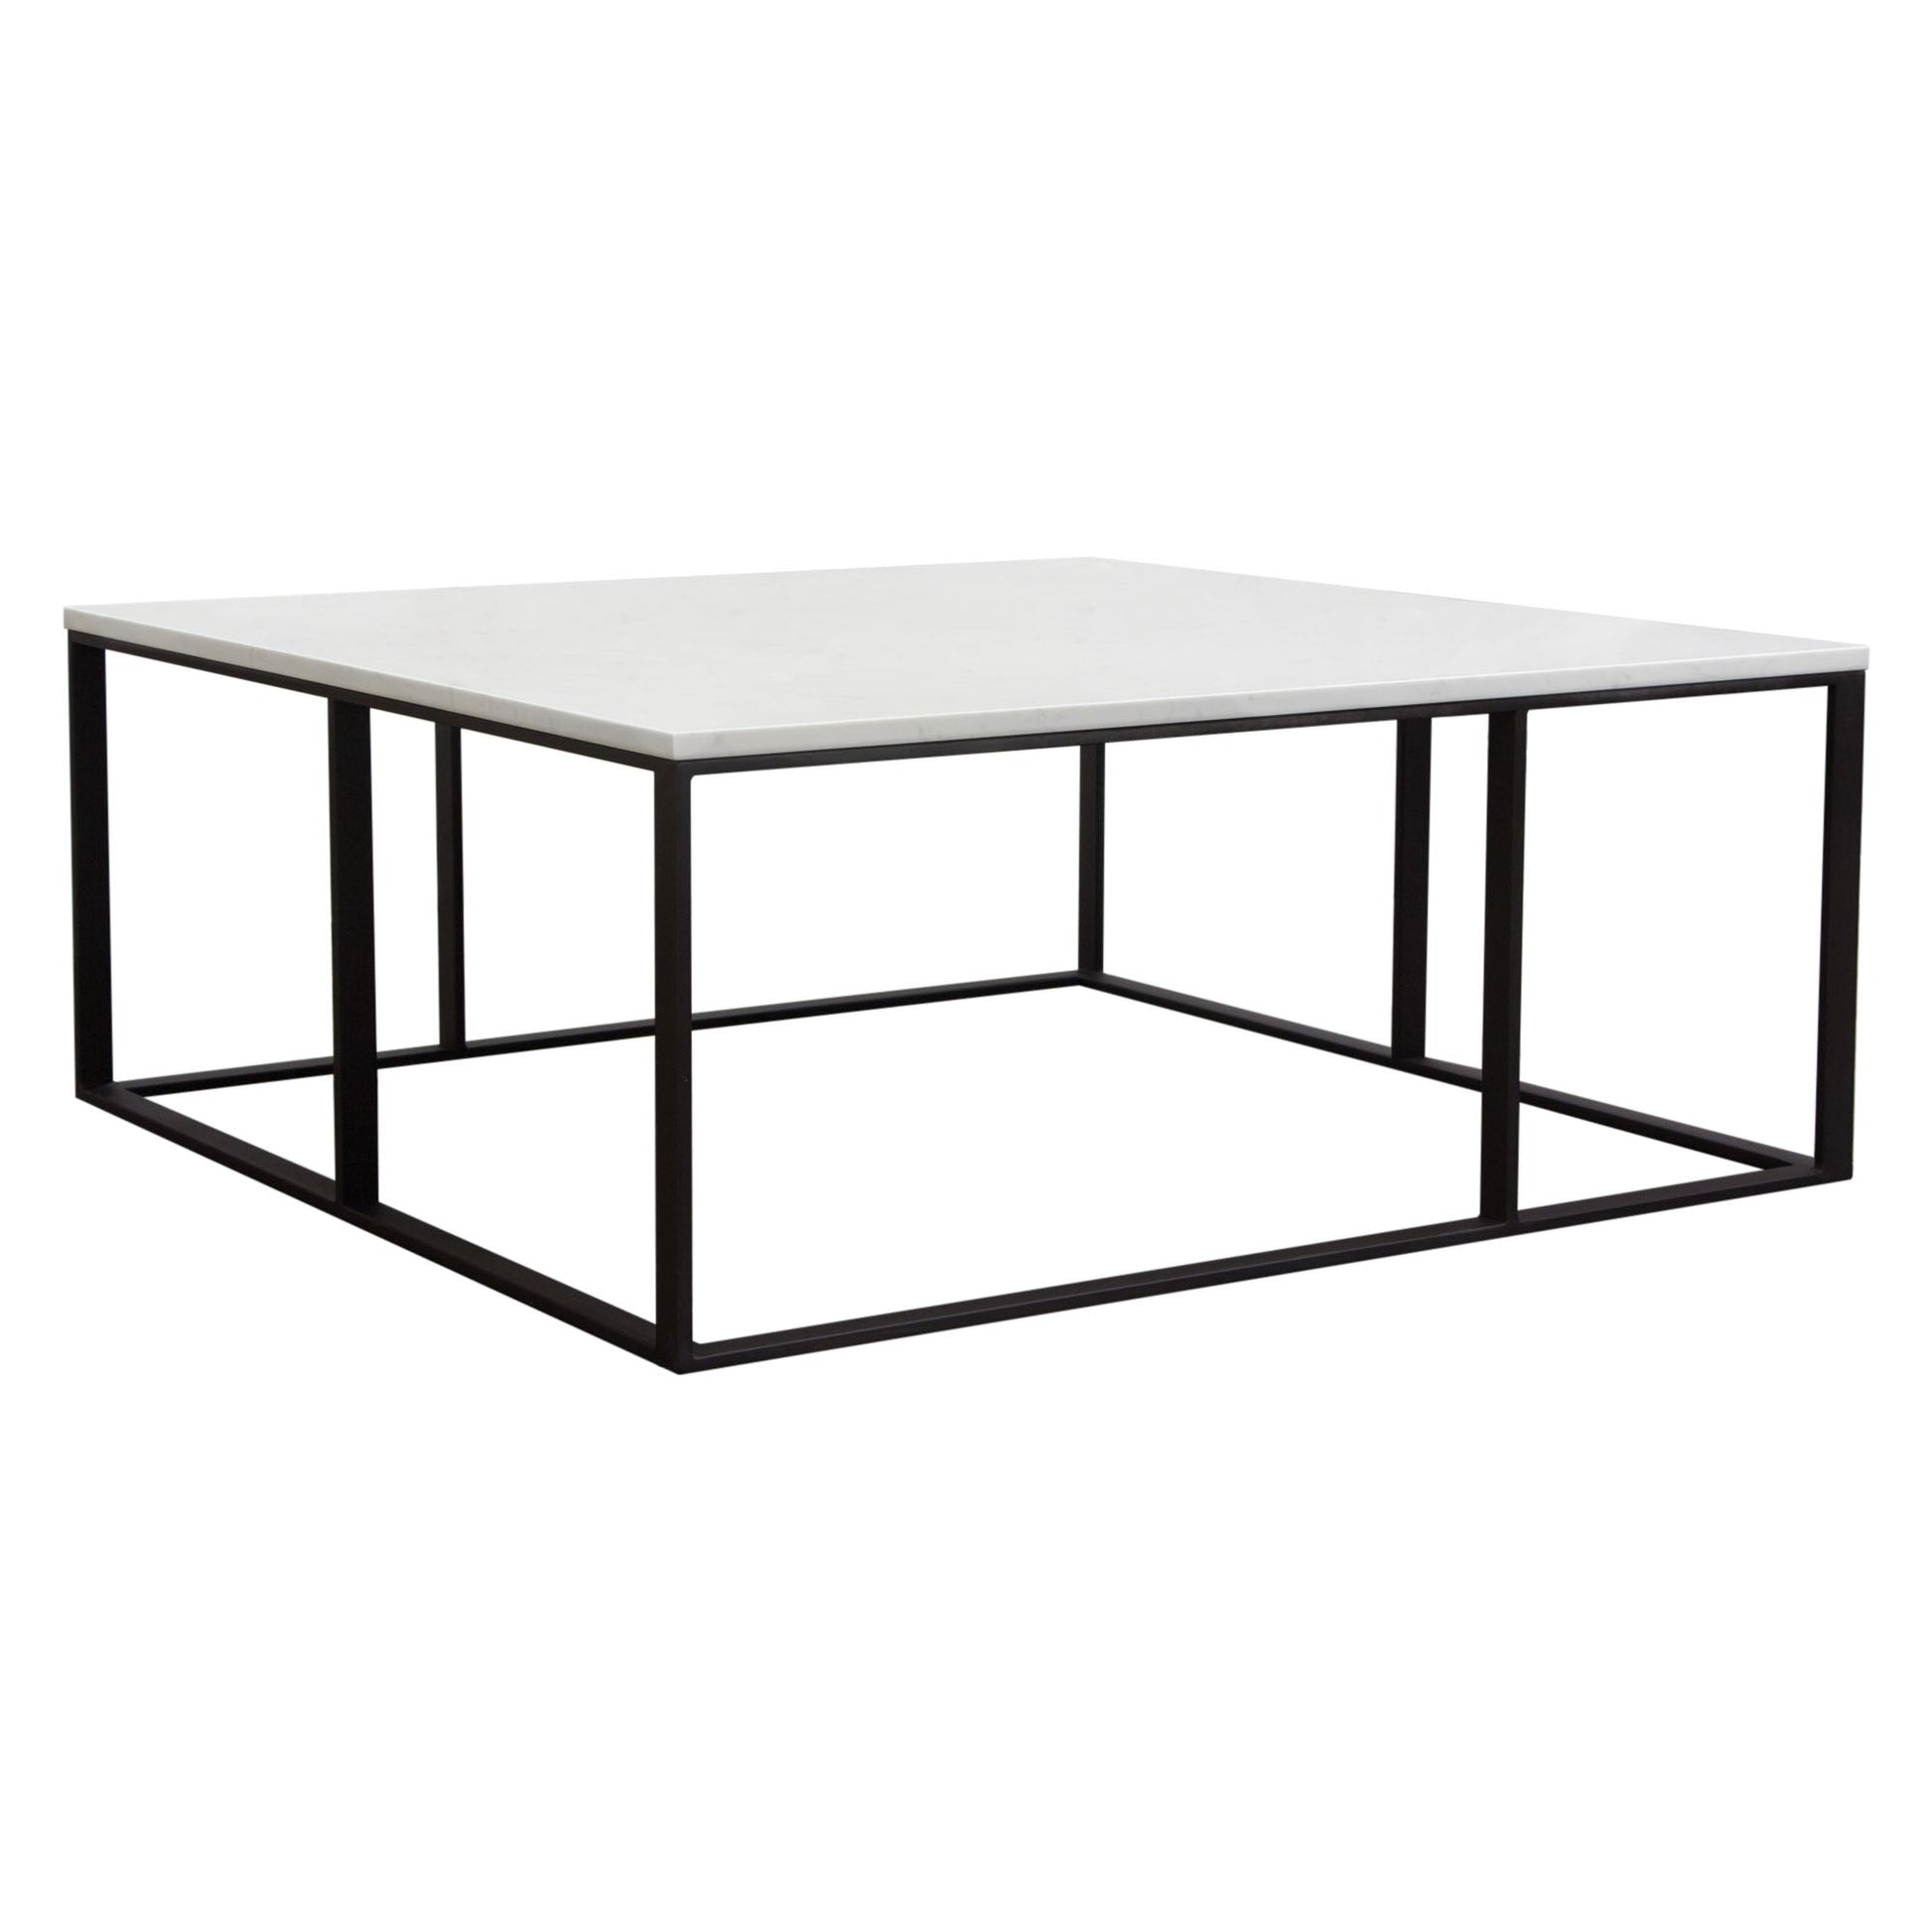 Surface Square Cocktail Table w/ Engineered Marble Top & Black Powder Coated Metal Base - Elite Maison